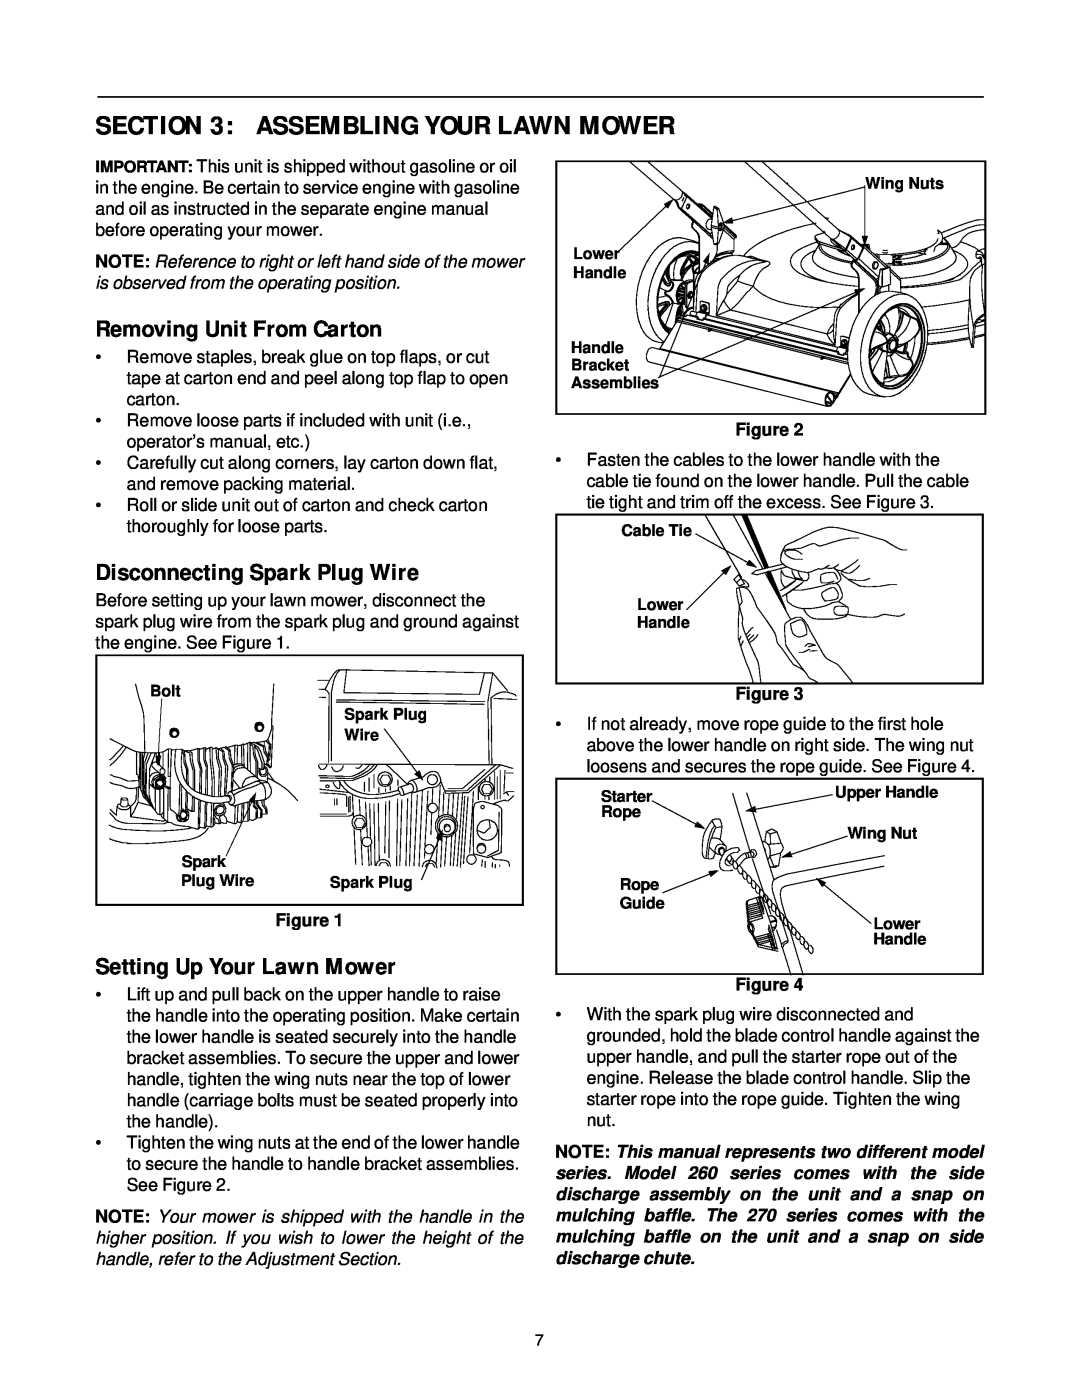 MTD 260 Thru 279 manual Assembling Your Lawn Mower, Removing Unit From Carton, Disconnecting Spark Plug Wire 